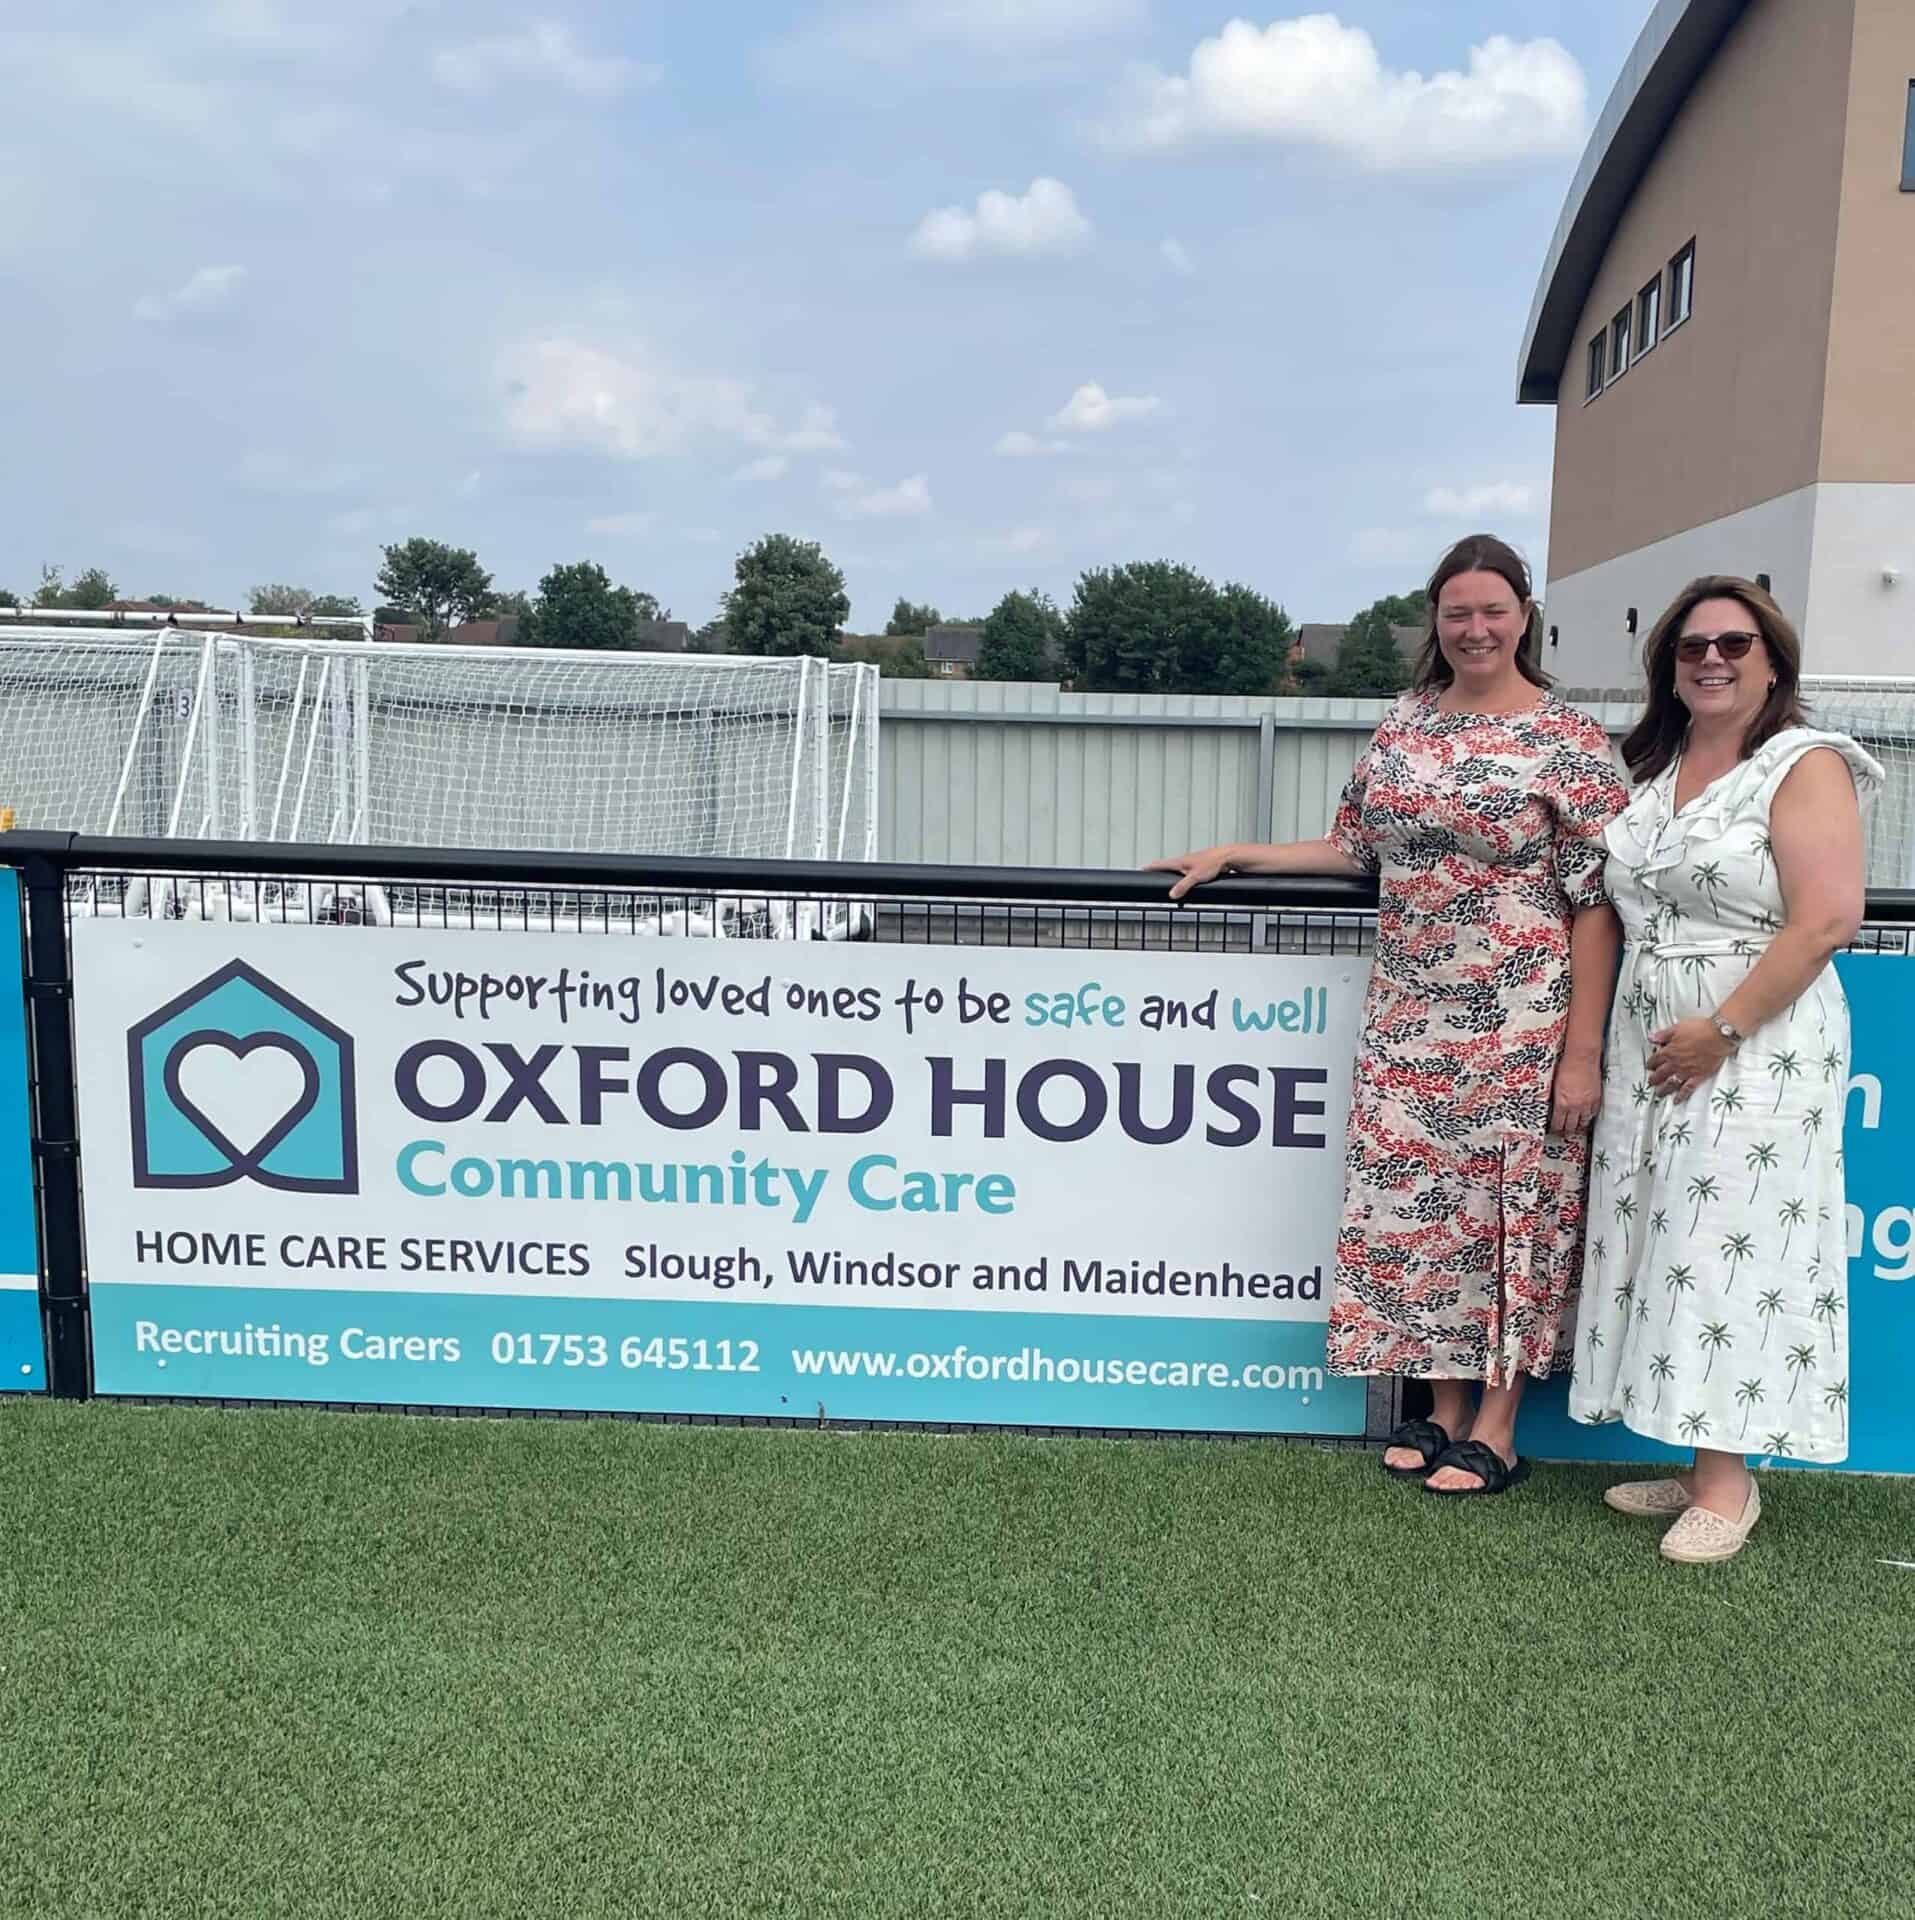 Two smiling women standing in front of a banner for oxford house community care, promoting services for supporting loved ones to be safe and well, with contact information below.